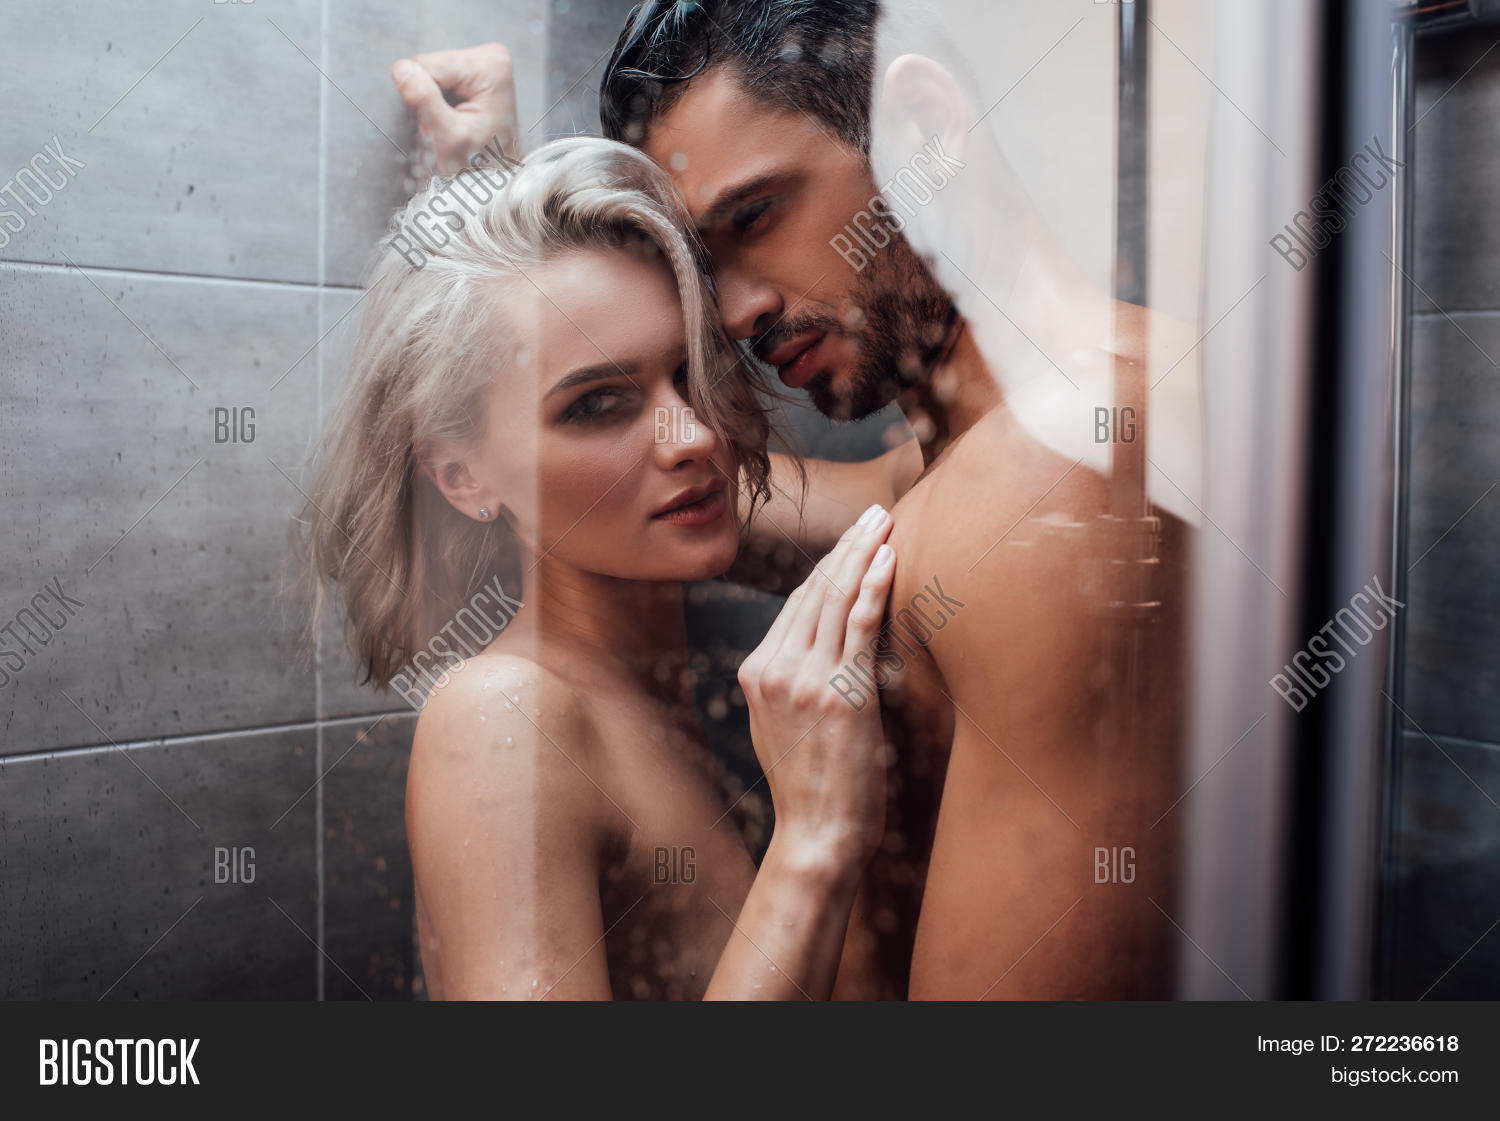 anika schmitz recommends naked couple in shower pic